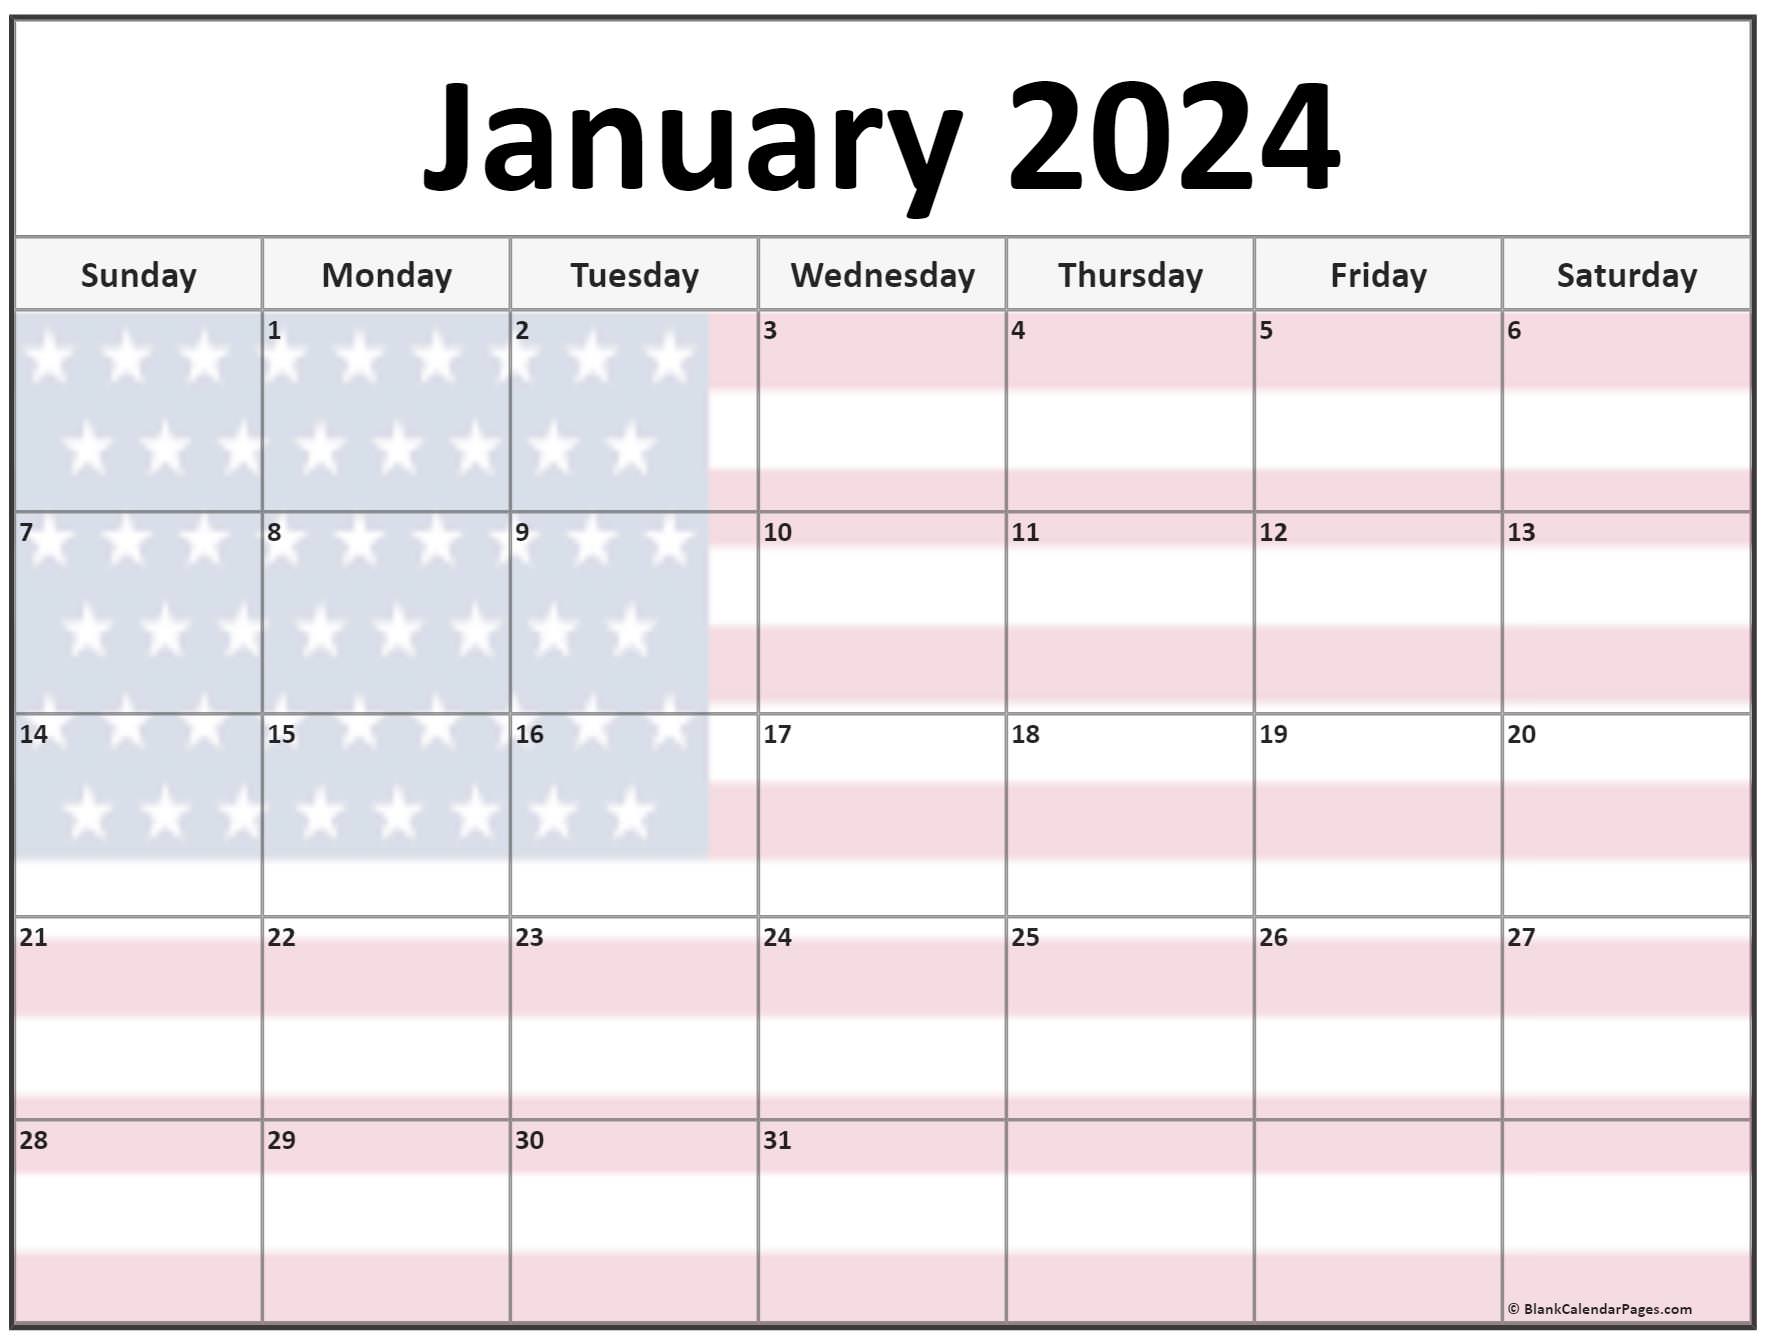 Collection of January 2024 photo calendars with image filters.